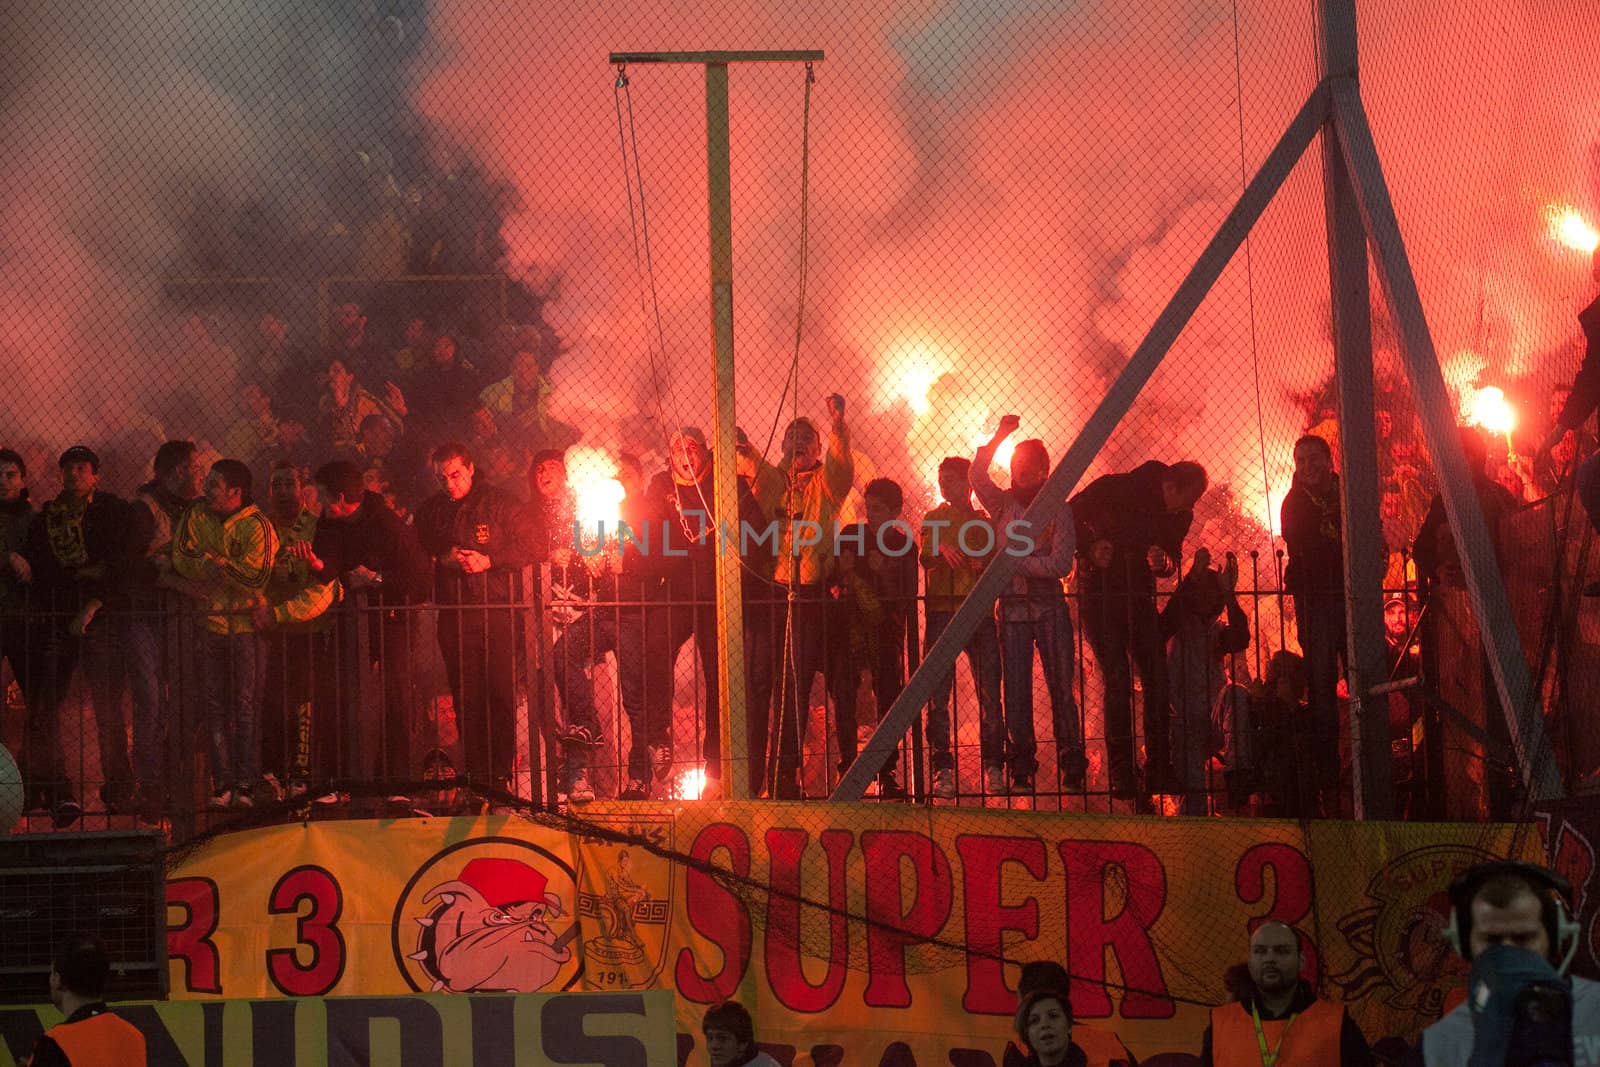 THESSALONIKI, GREECE - OCTOBER 23: Supporters and fans of the team celebrating the Aris team. Paok and Aris (1-1) on October 23, 2011 in Thessaloniki, Greece